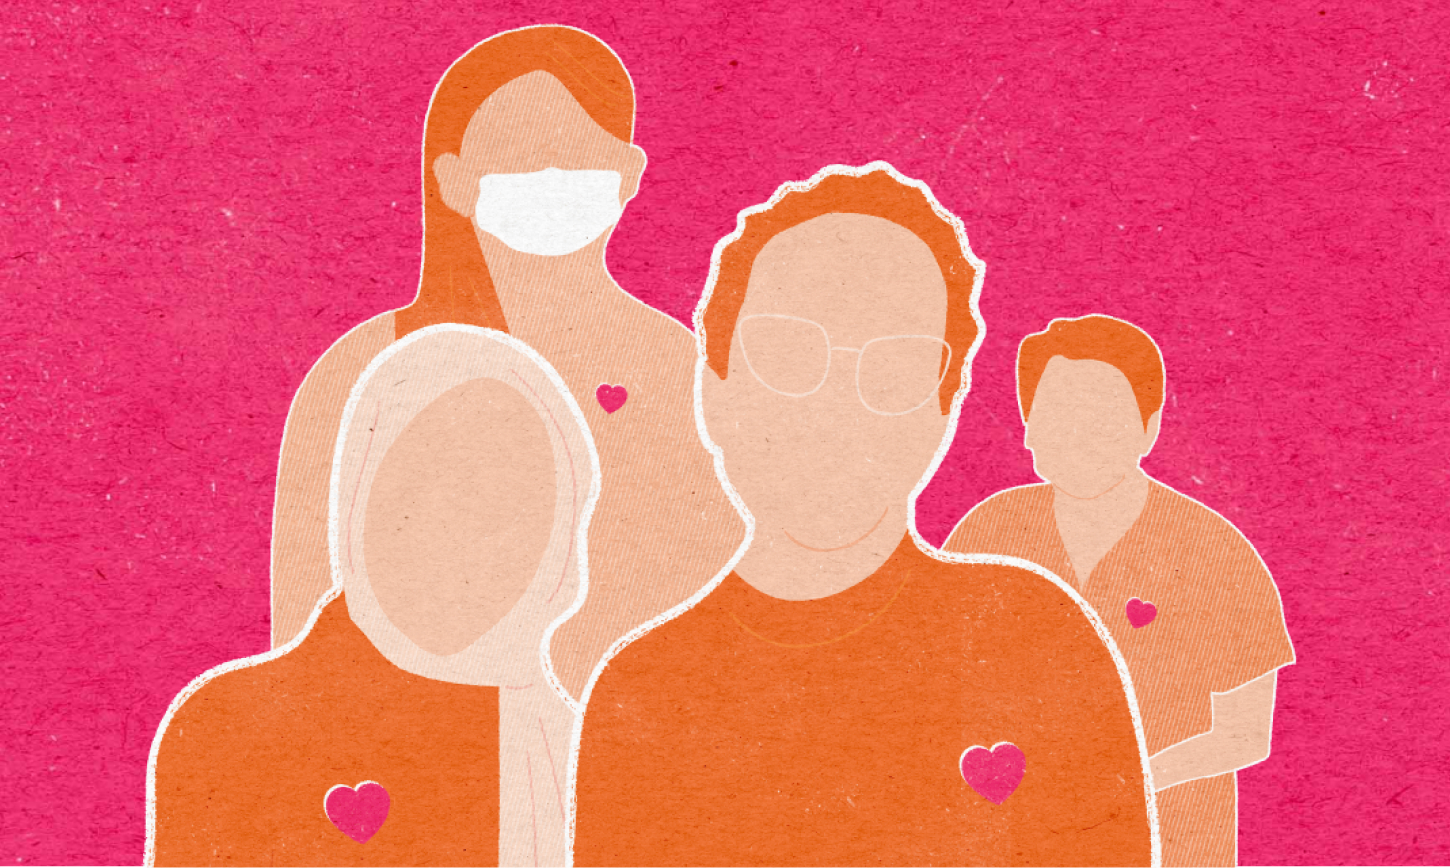 An orange and pink, line and flat shape illustration, with matchbook-like texture, of a diverse group of five abortion providers, each with a heart on their shirt.